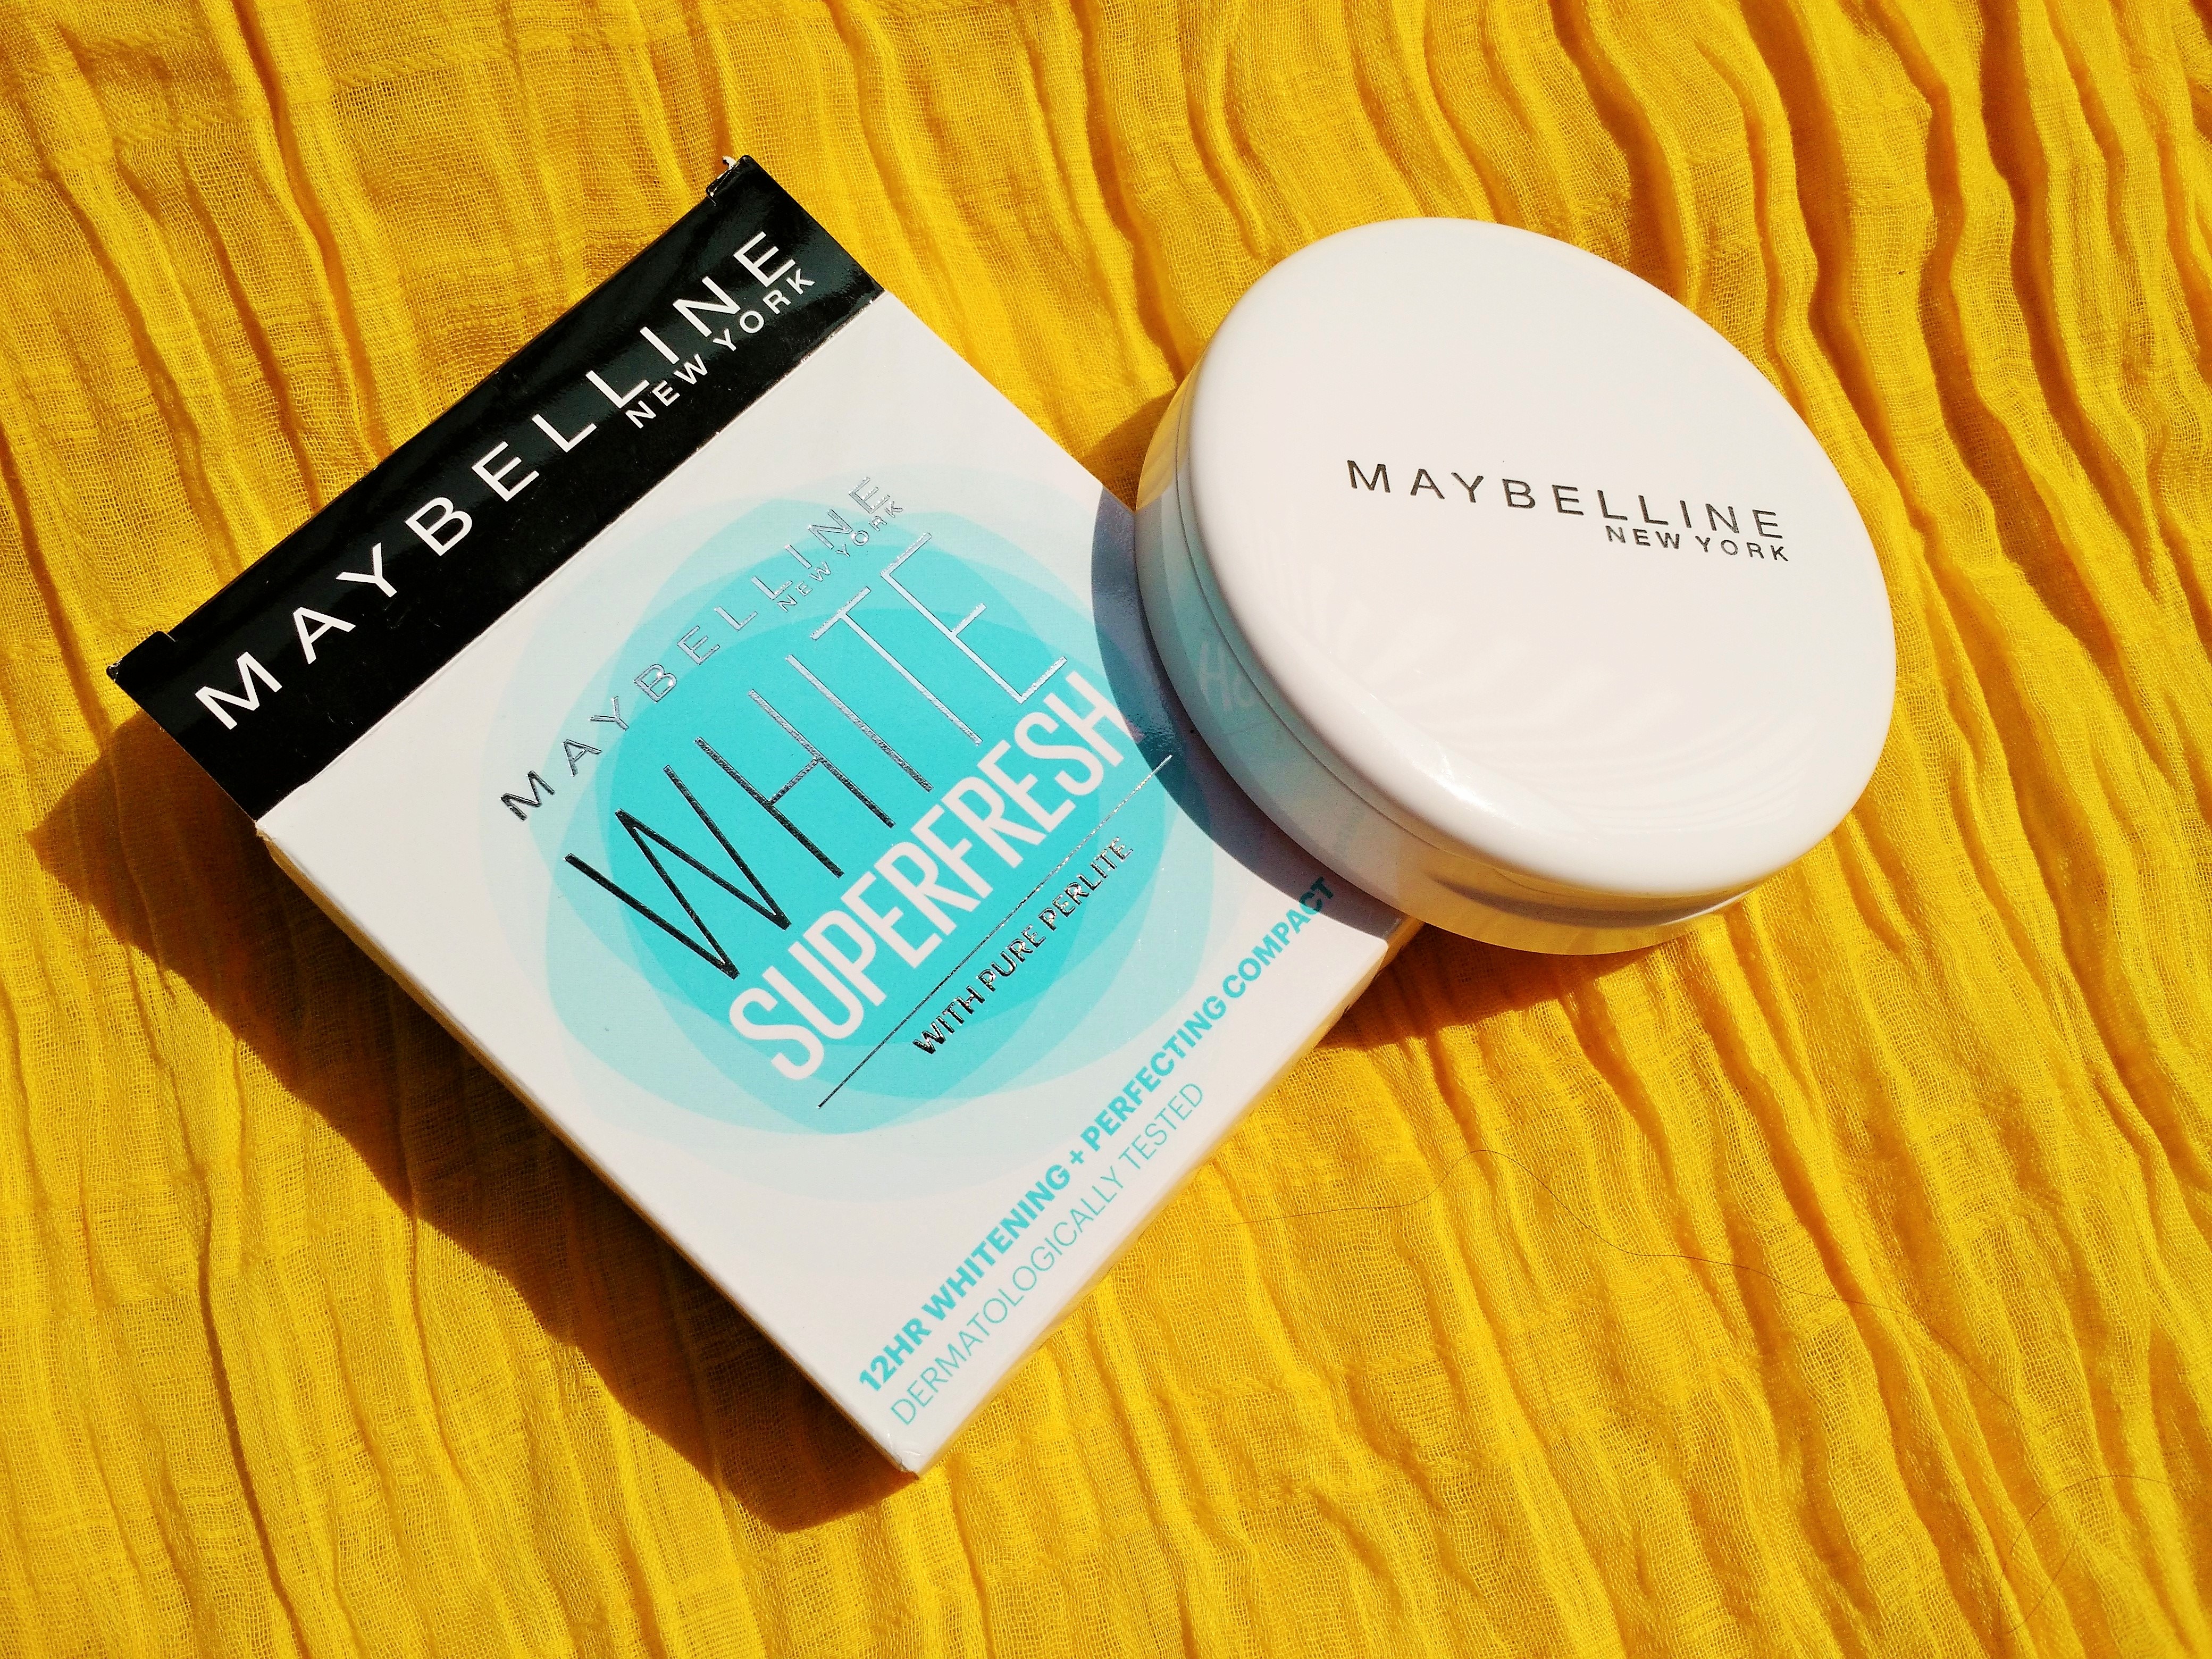 Maybelline White Superfresh Compact